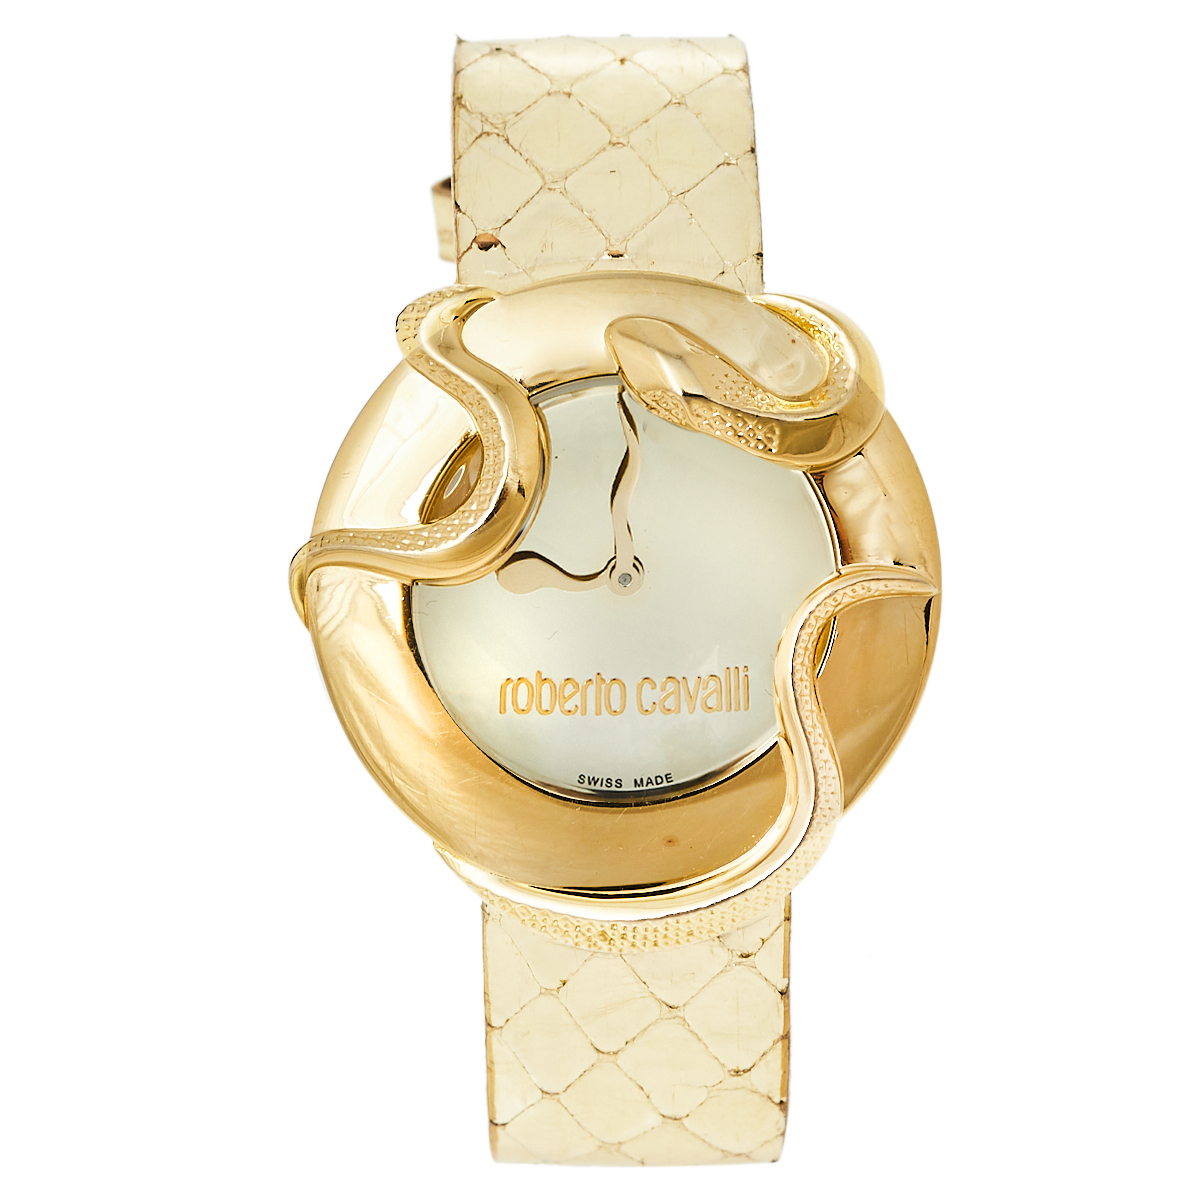 Roberto Cavalli Champagne Gold Plated Stainless Steel Snake 7251165617 Women's Wristwatch 37 mm